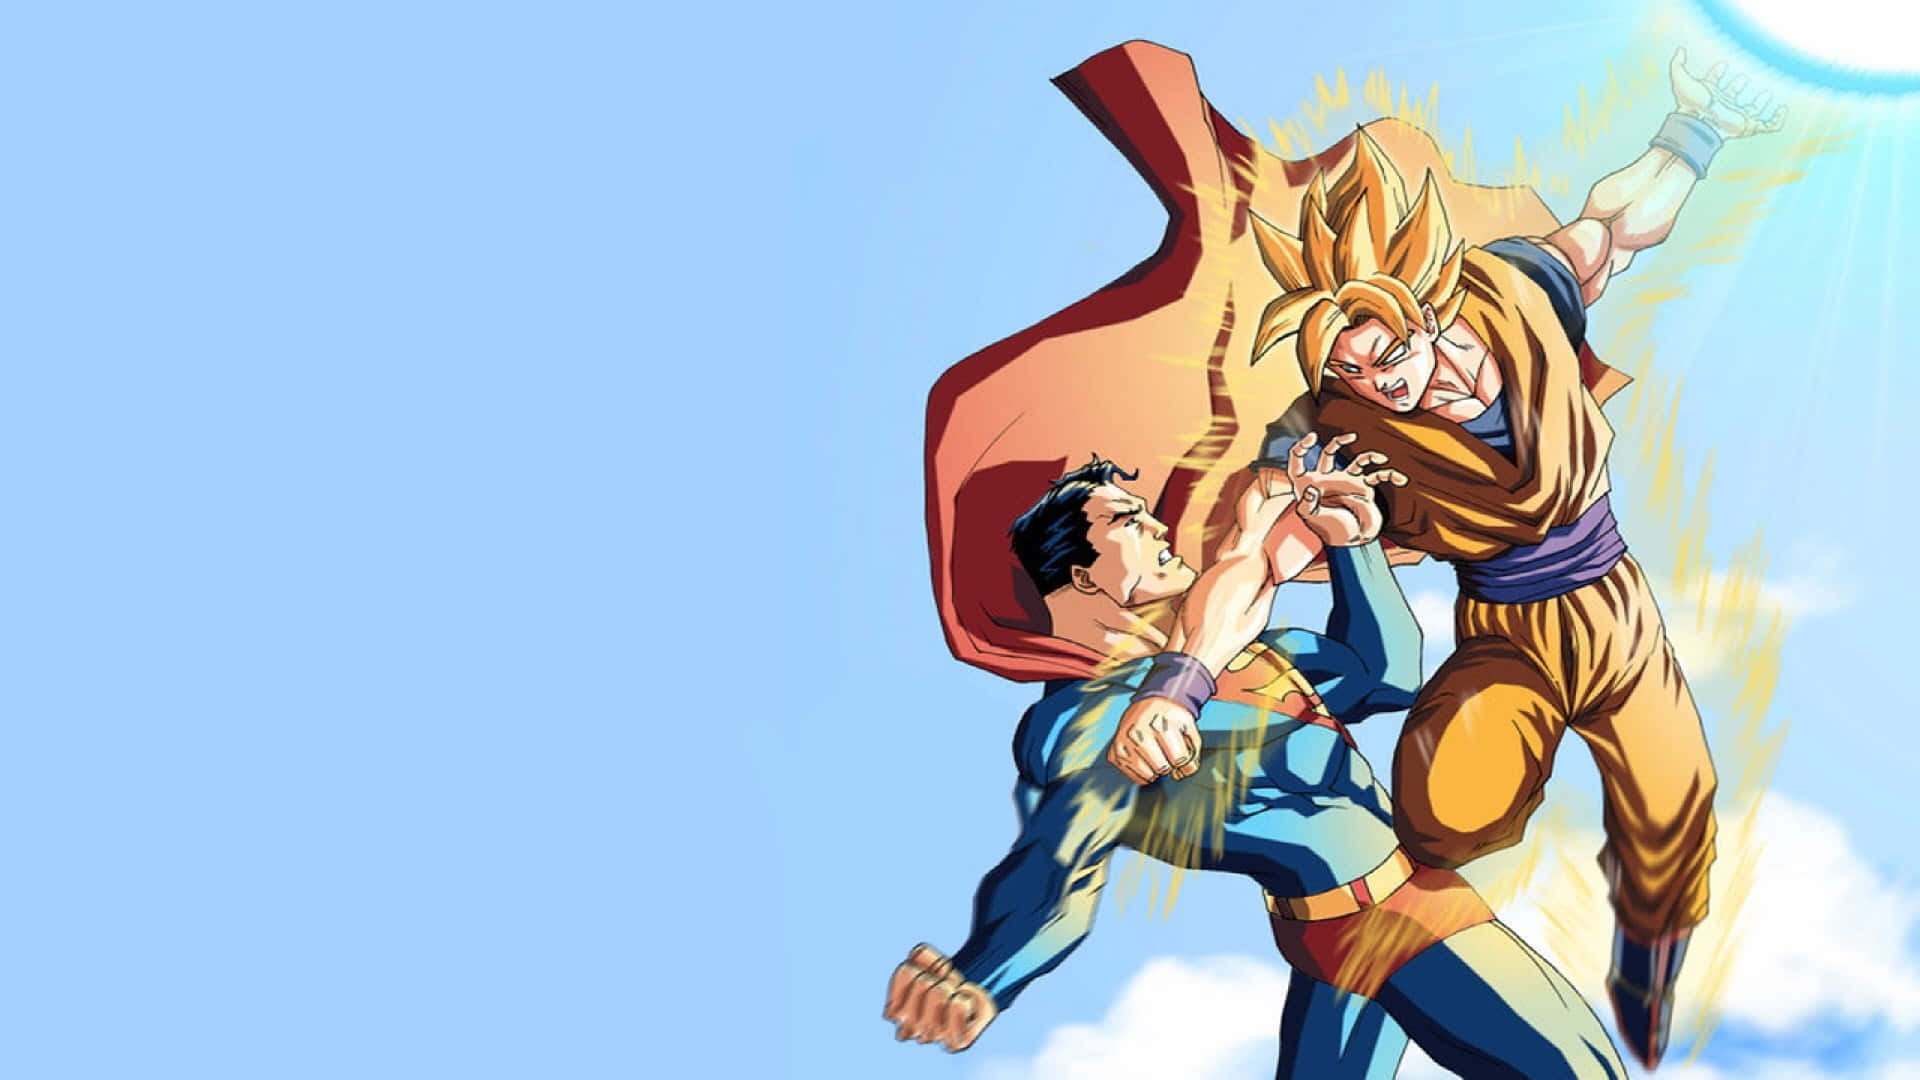 "The world of Dragon Ball at your fingertips" Wallpaper